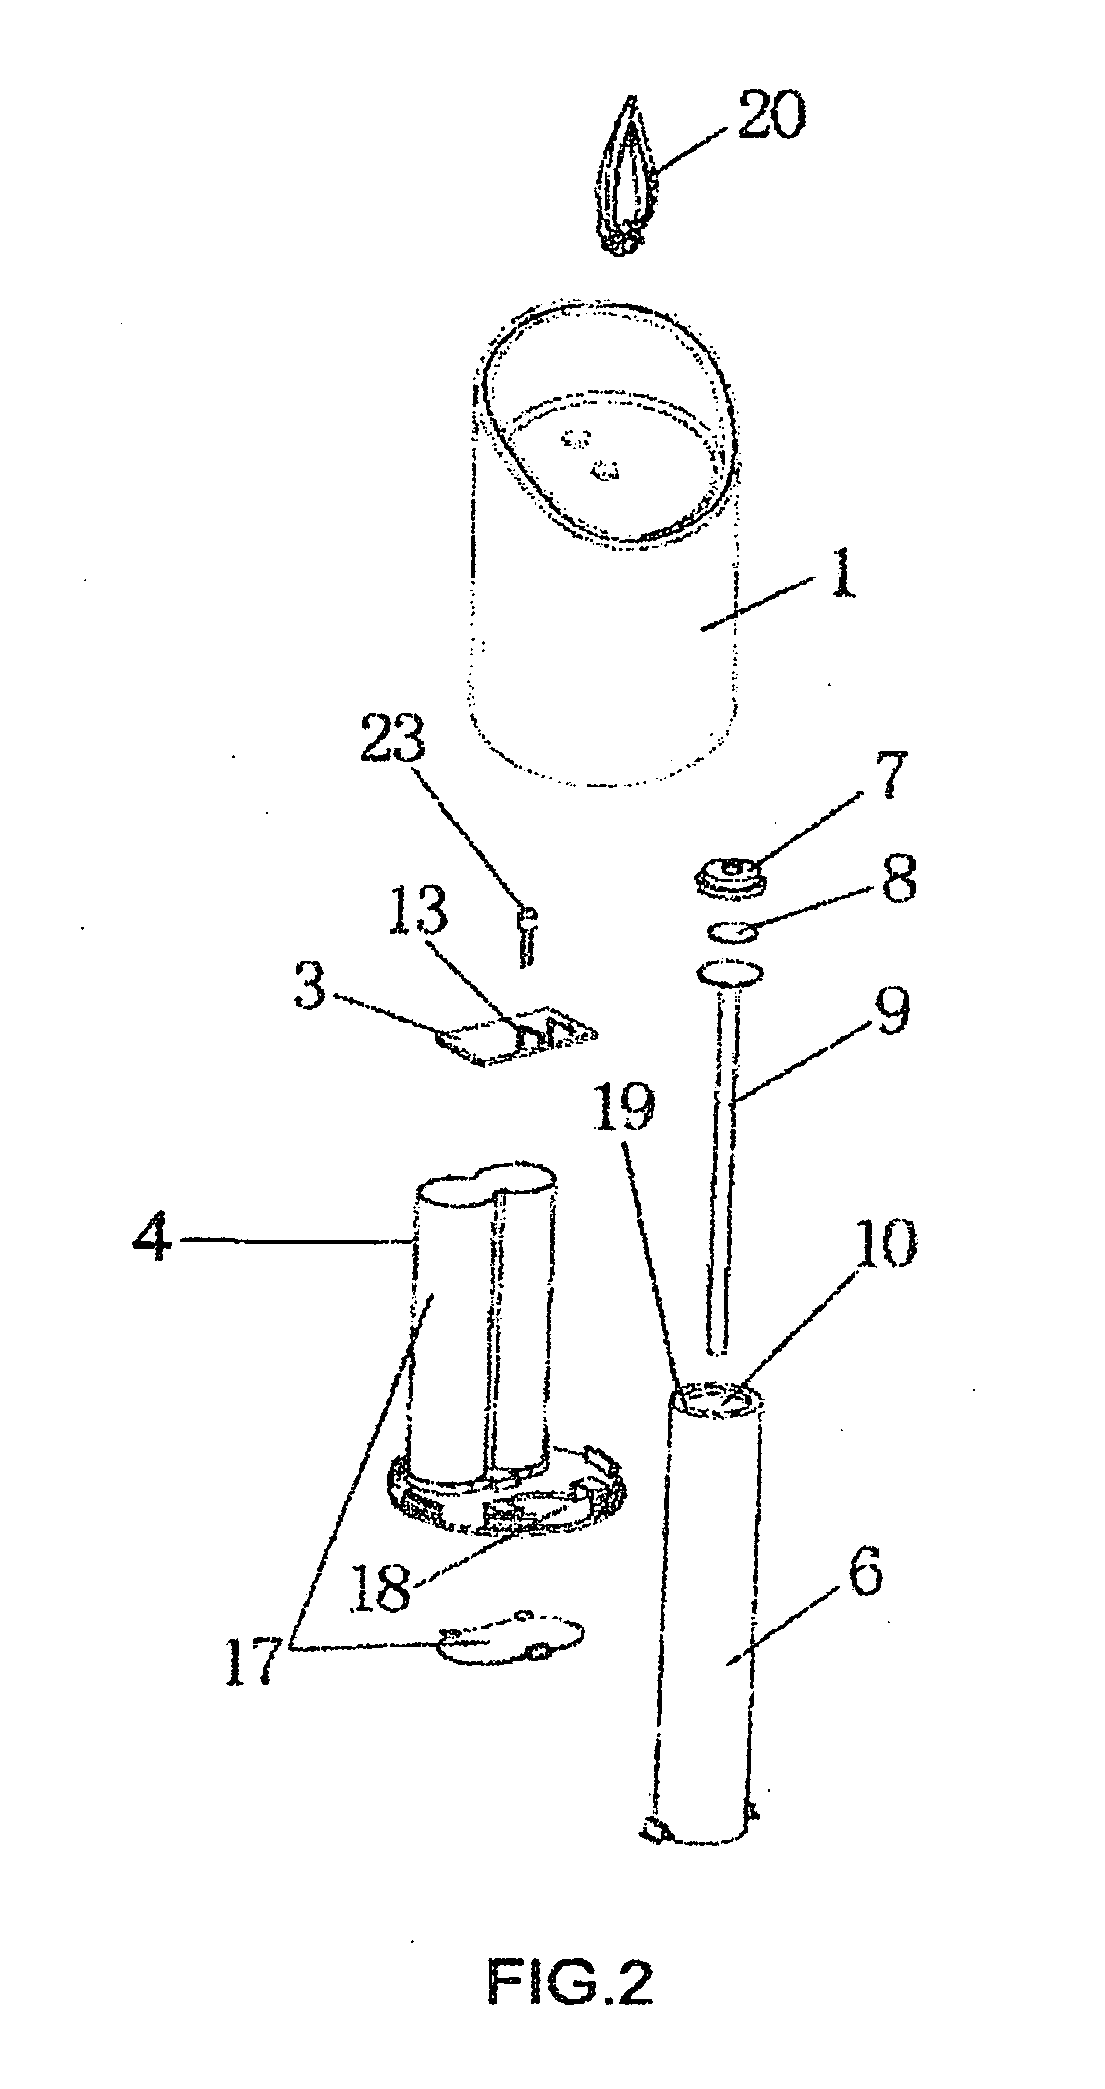 LED candle lamp having humidifying and flavoring function